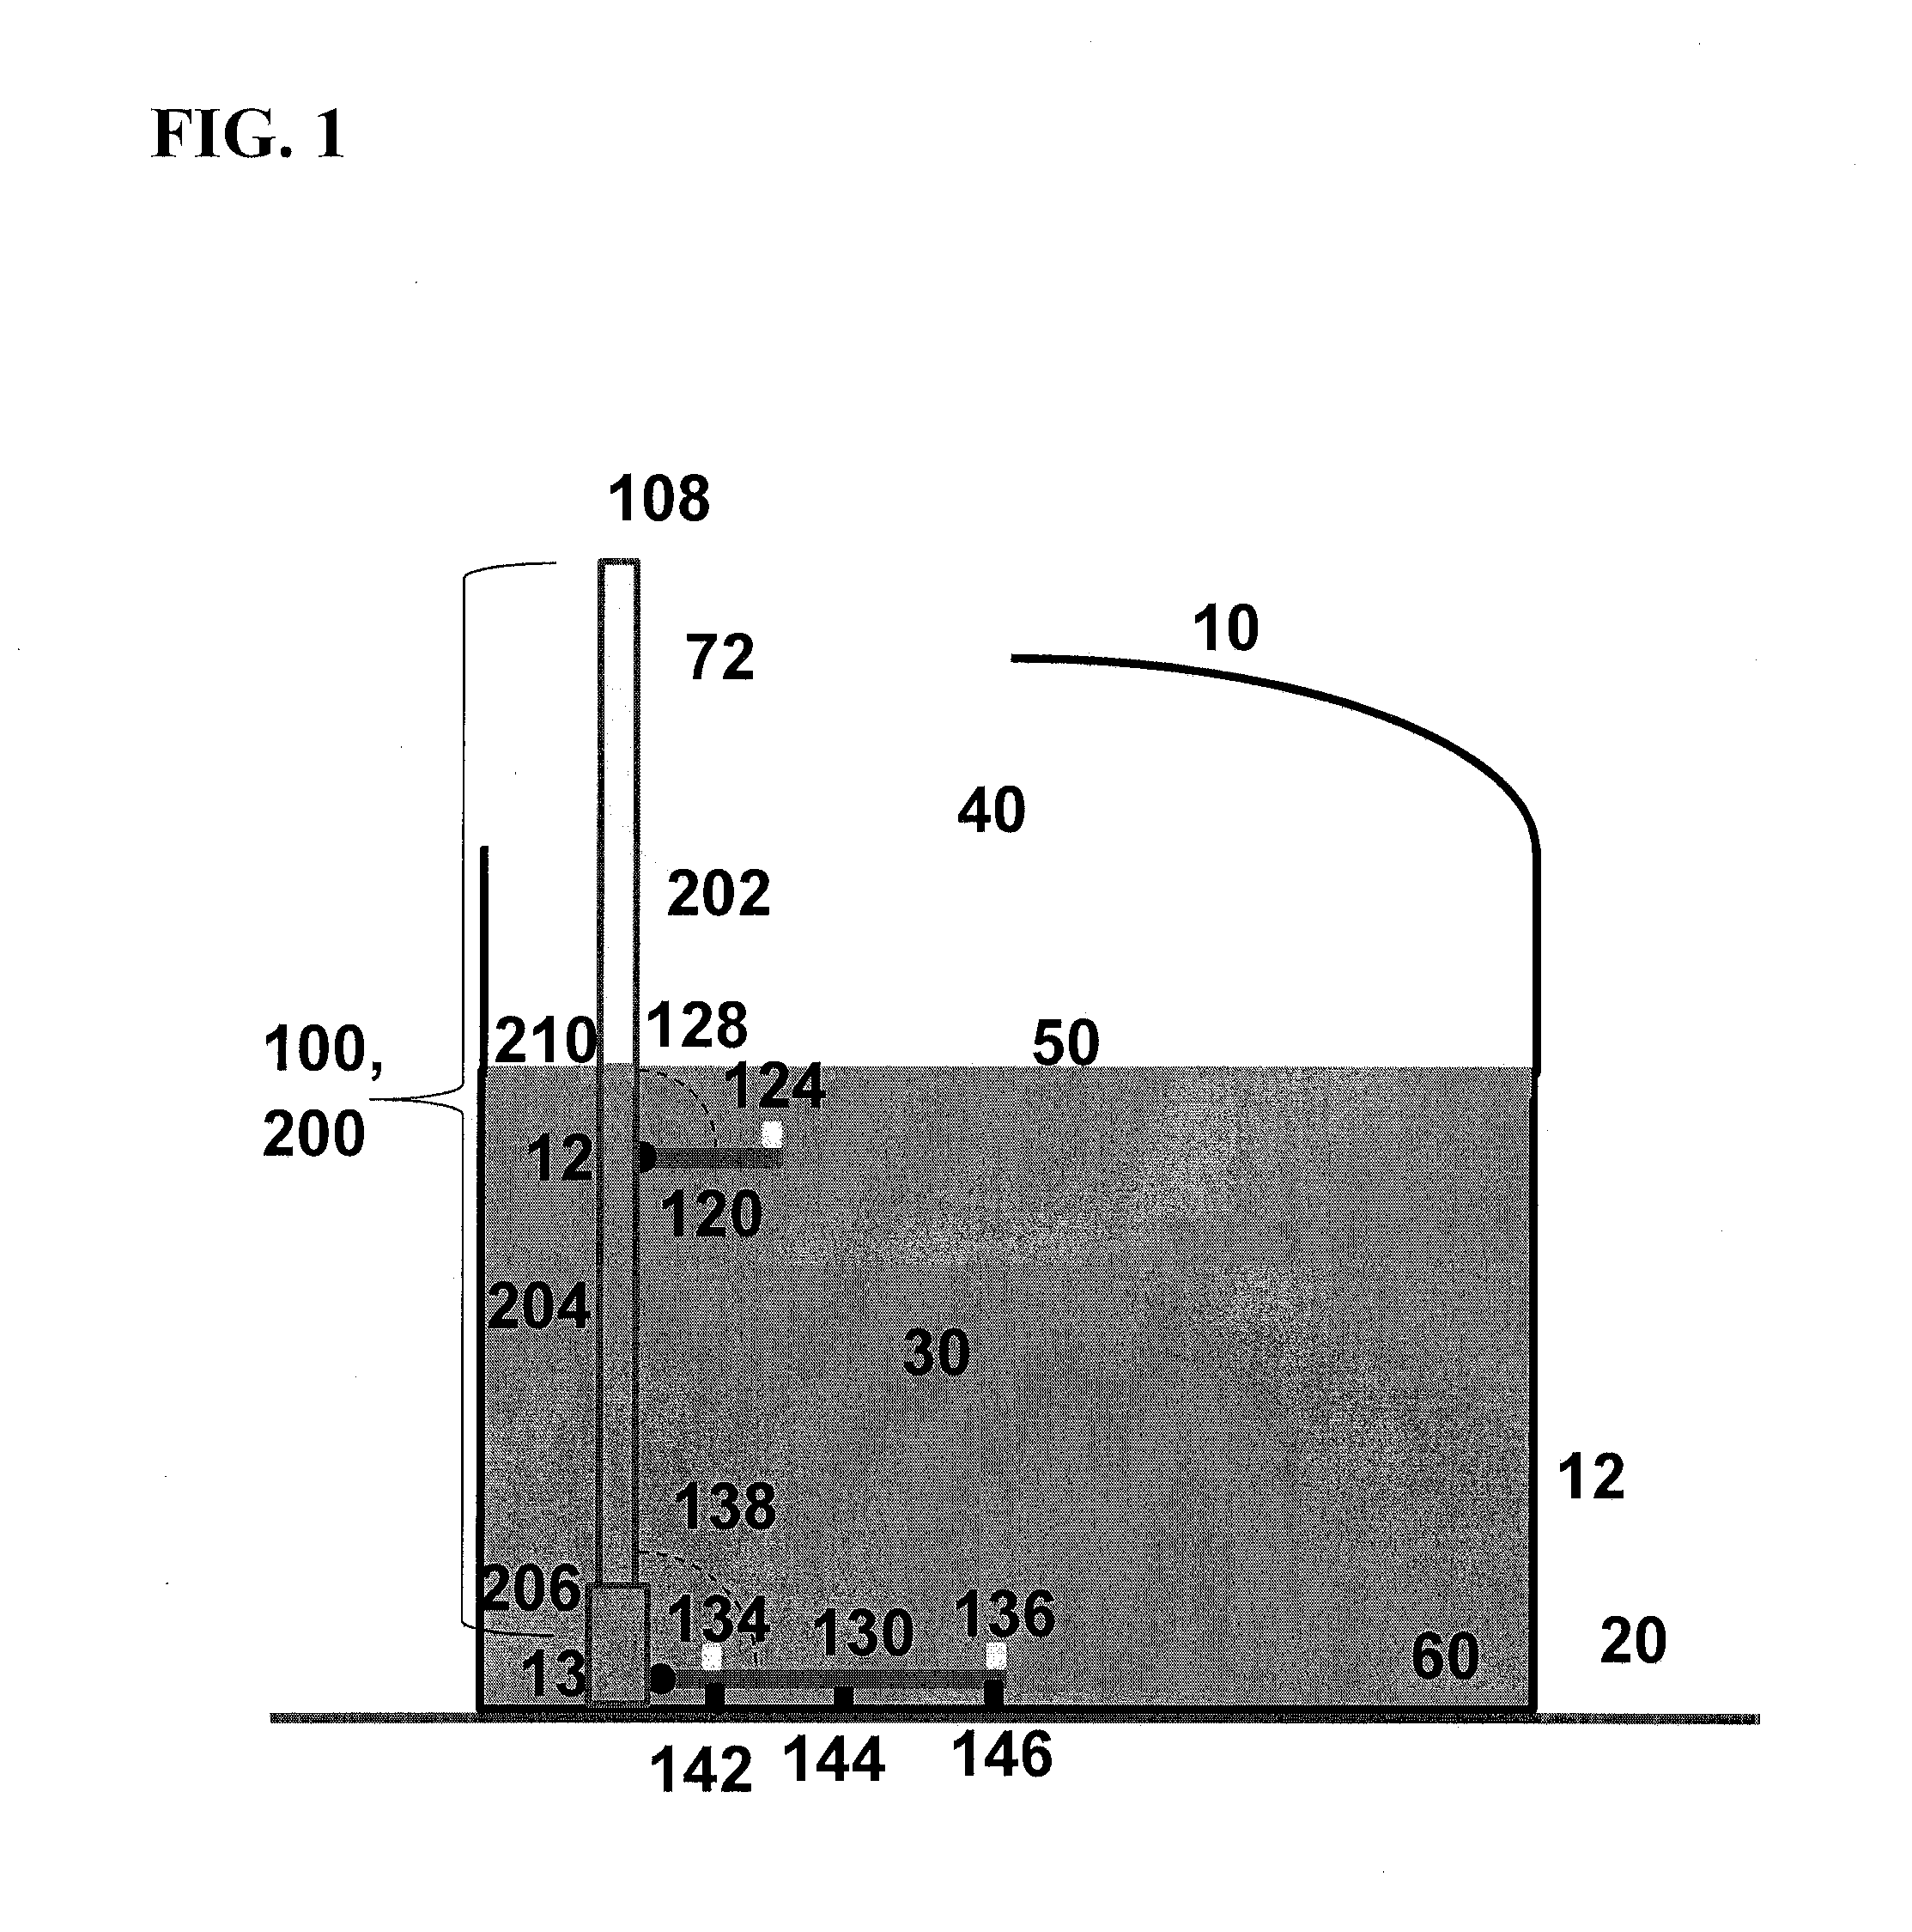 Method for Extending the Time Between Out-of-Service, In-Tank Inspections Using Ultrasonic Sensor